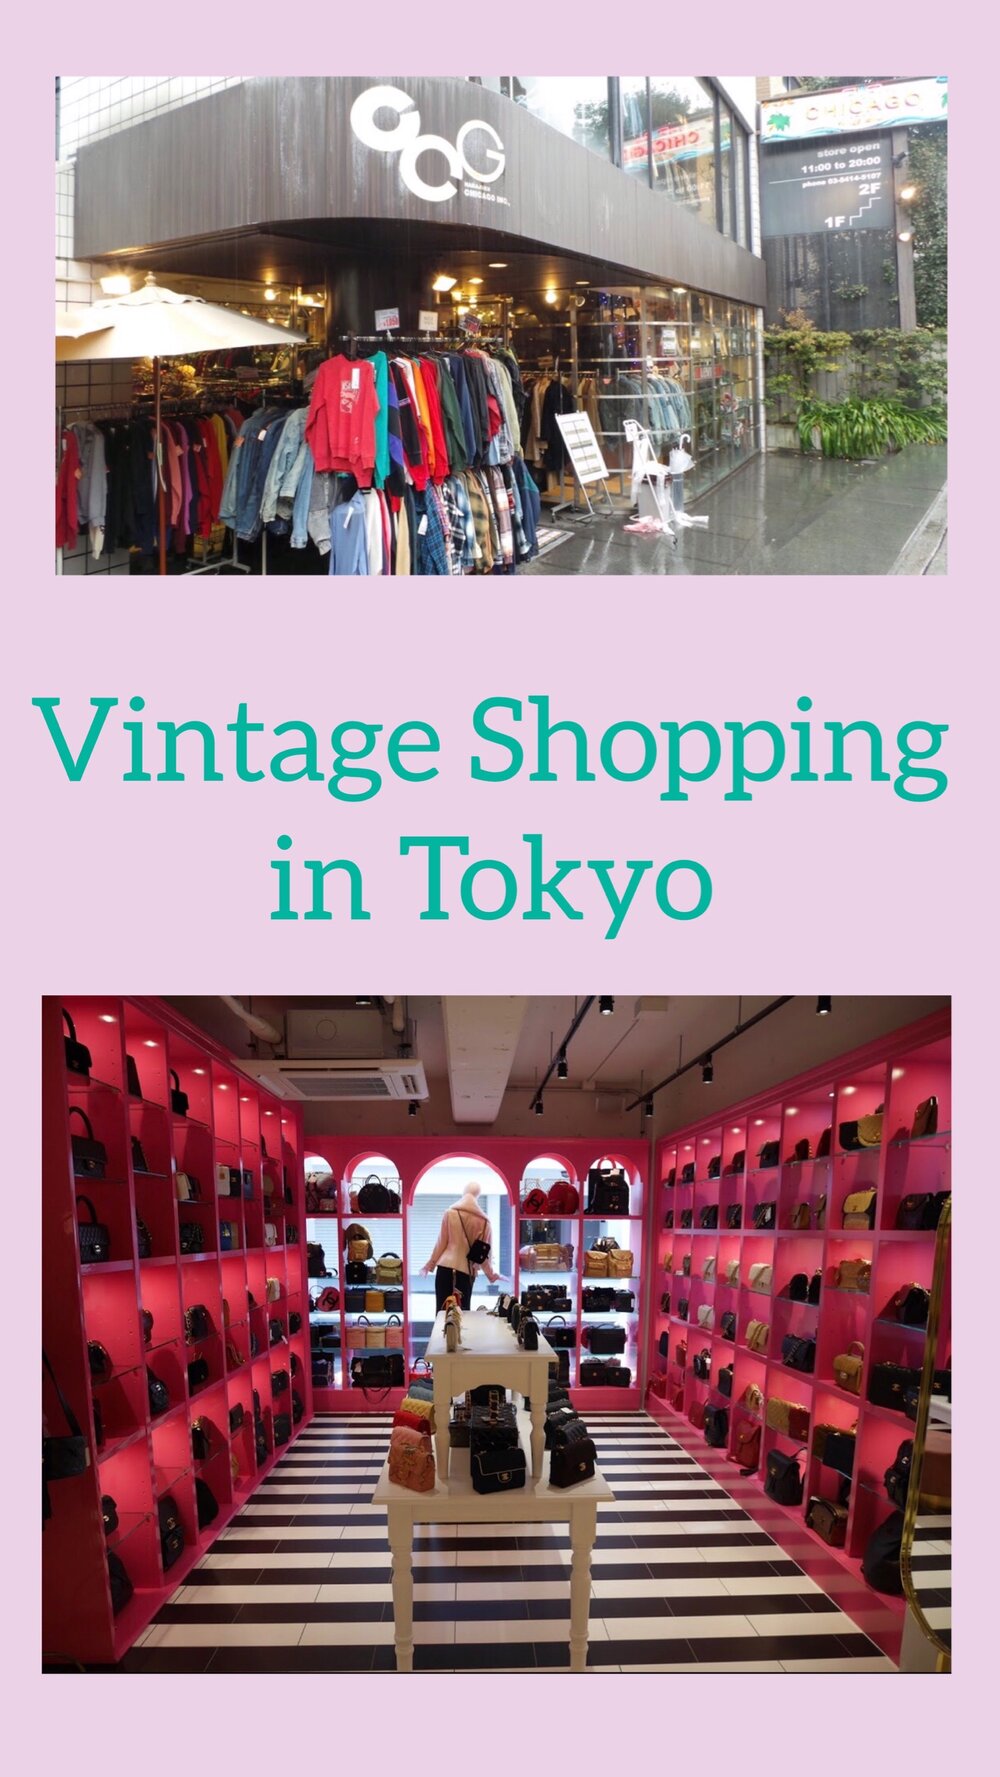 Guide to Vintage Shopping in Tokyo: By Area and Luxury Goods